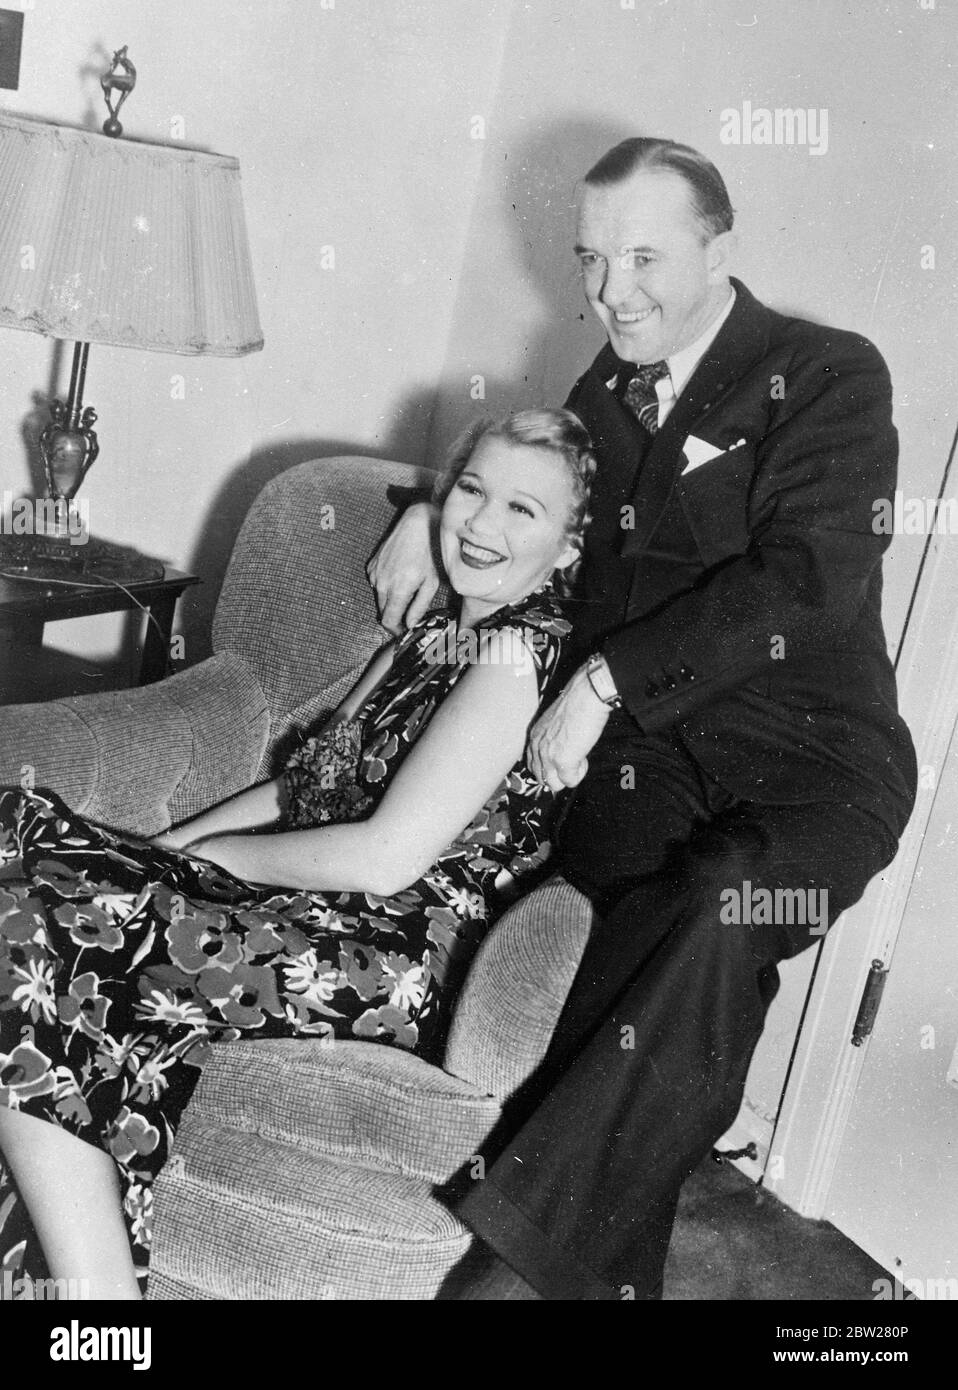 Stan Laurel and his fifth wife. Married despite protests of fourth Mrs  Laurel. Stan Laurel, member of the Laurel and Hardy film comedy team,  photographed with his wife, formerly known as Illiana